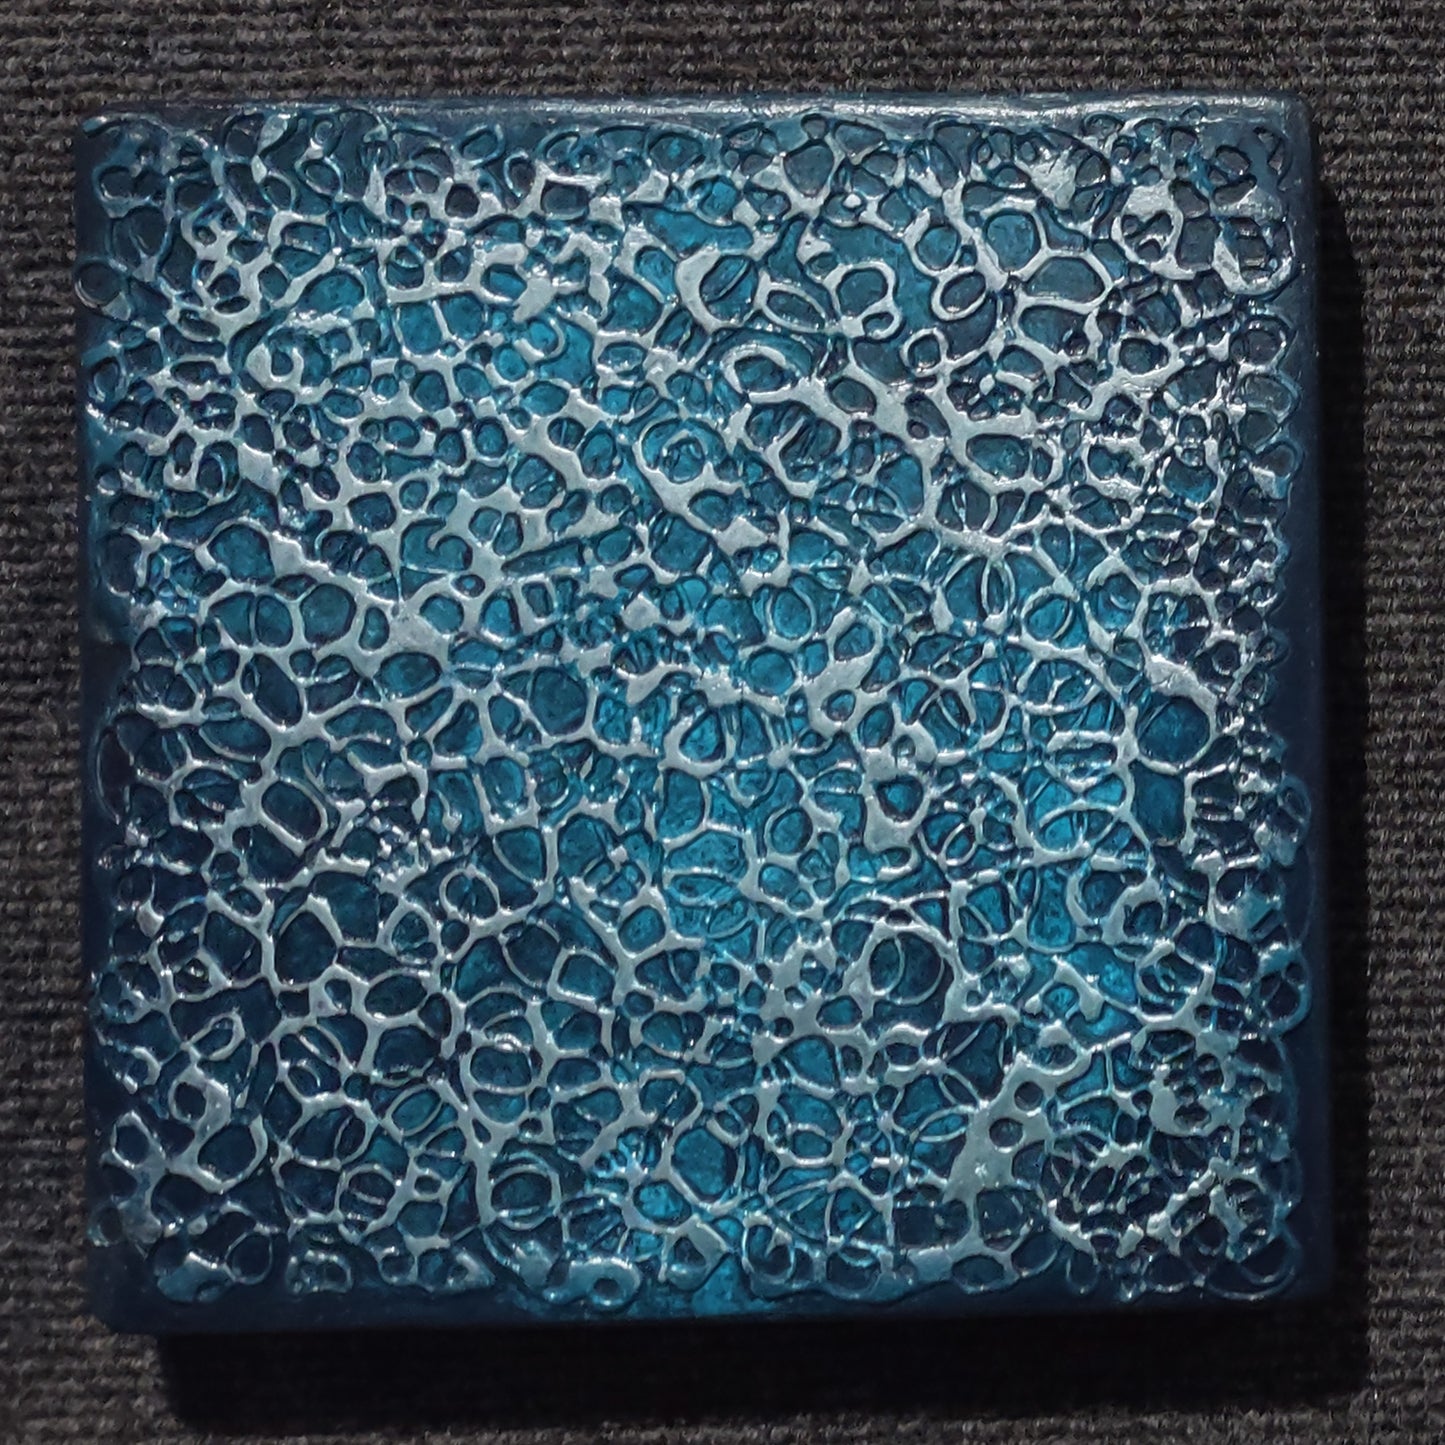 Texture Experiment 8x8 Turquoise with Metallic Blue